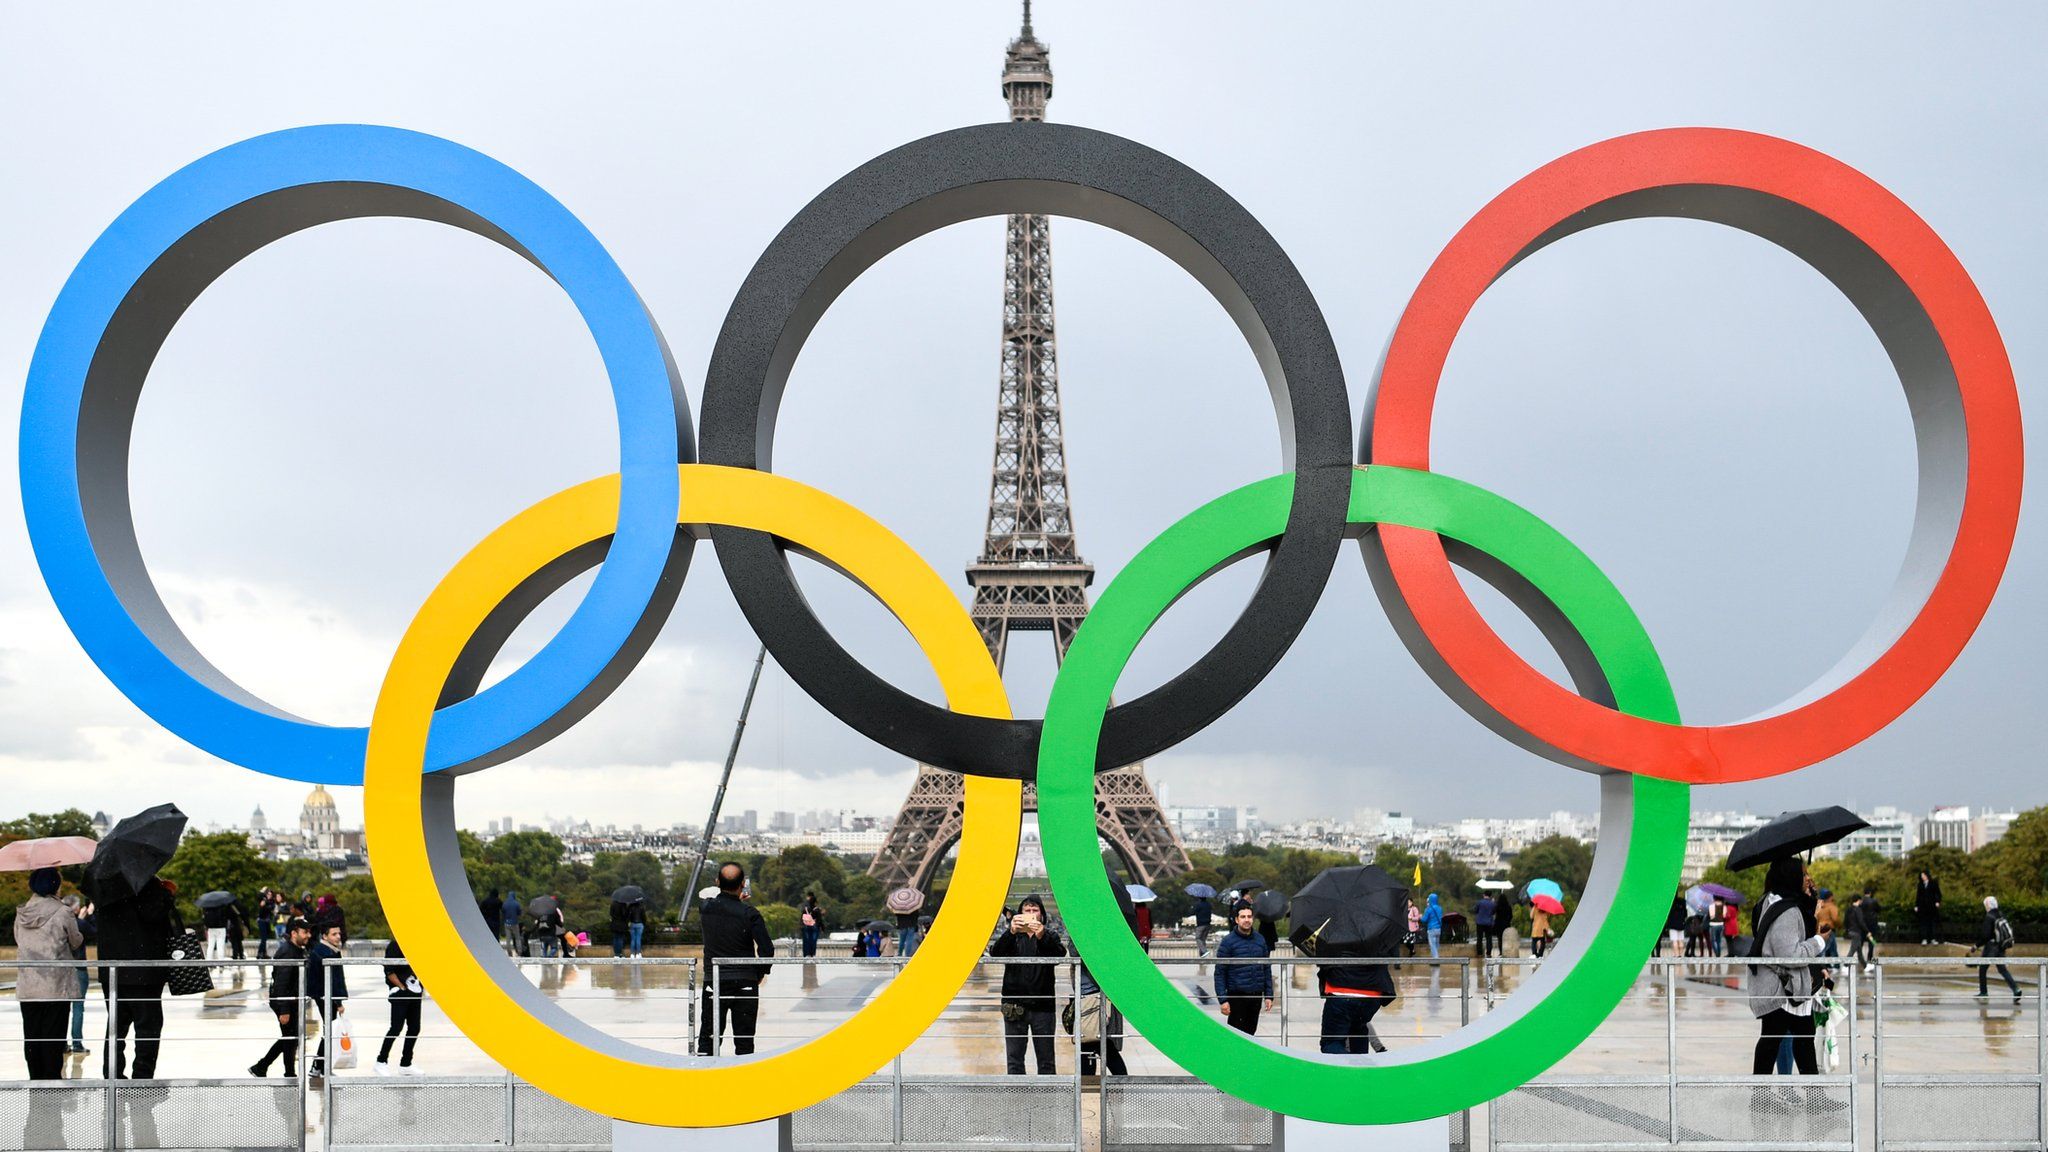 Olympic rings in Paris, with the Eiffel Tower in the background